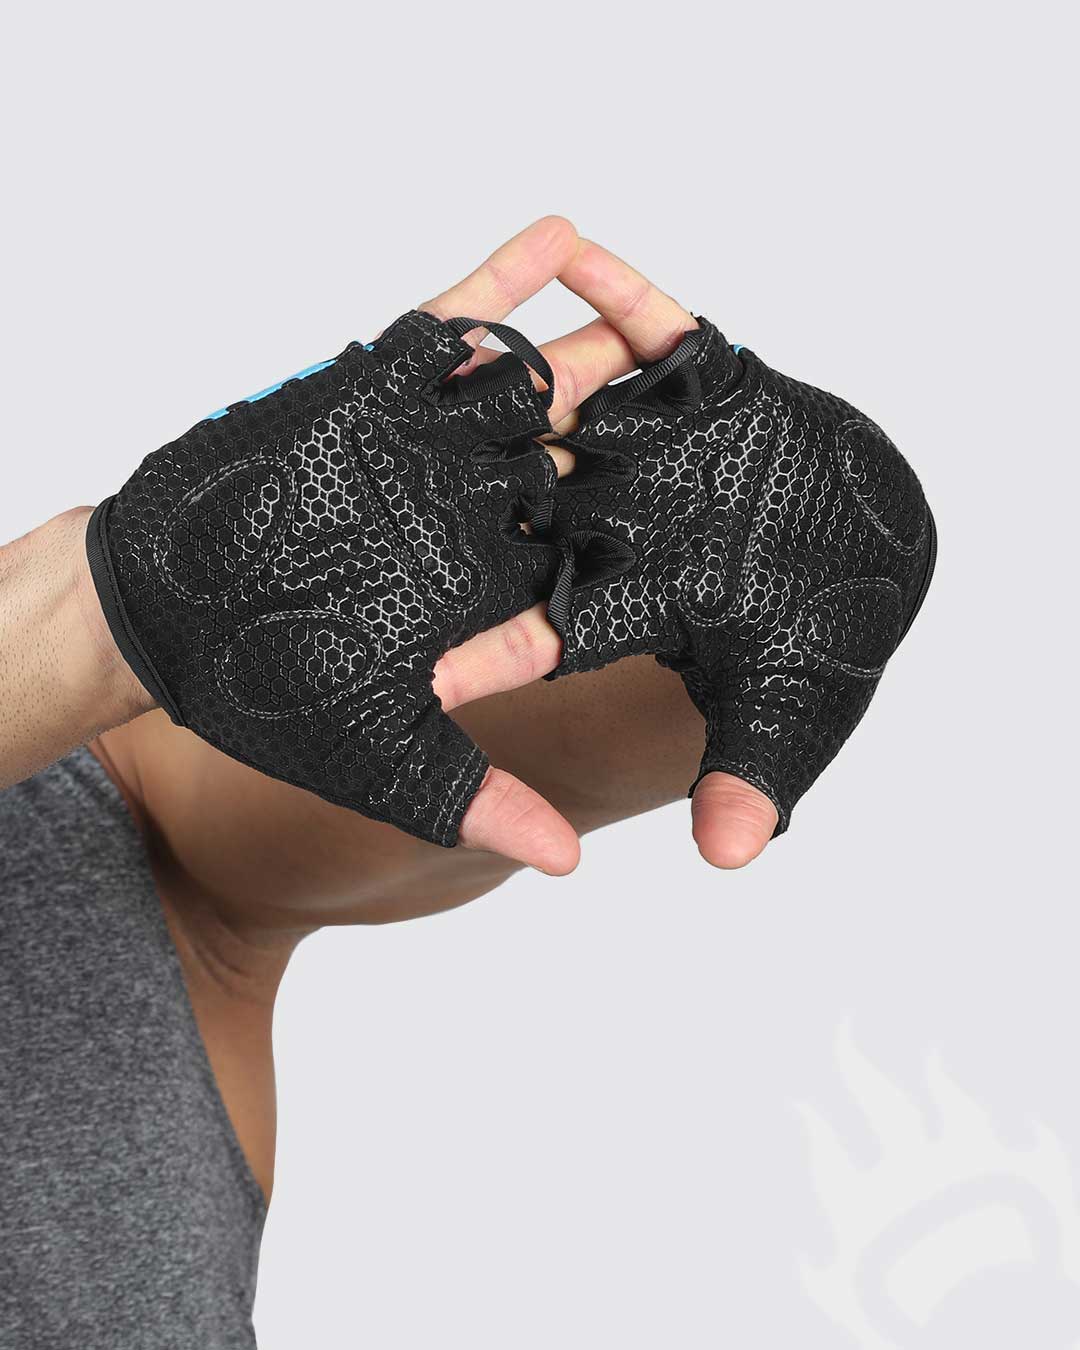 BECNBEAU Workout Gym Gloves Exercise Gloves Watersports Rowing Kayak Weight  Lifting Training Fitness Yoga Grip Training for Women Men Youth Teenager